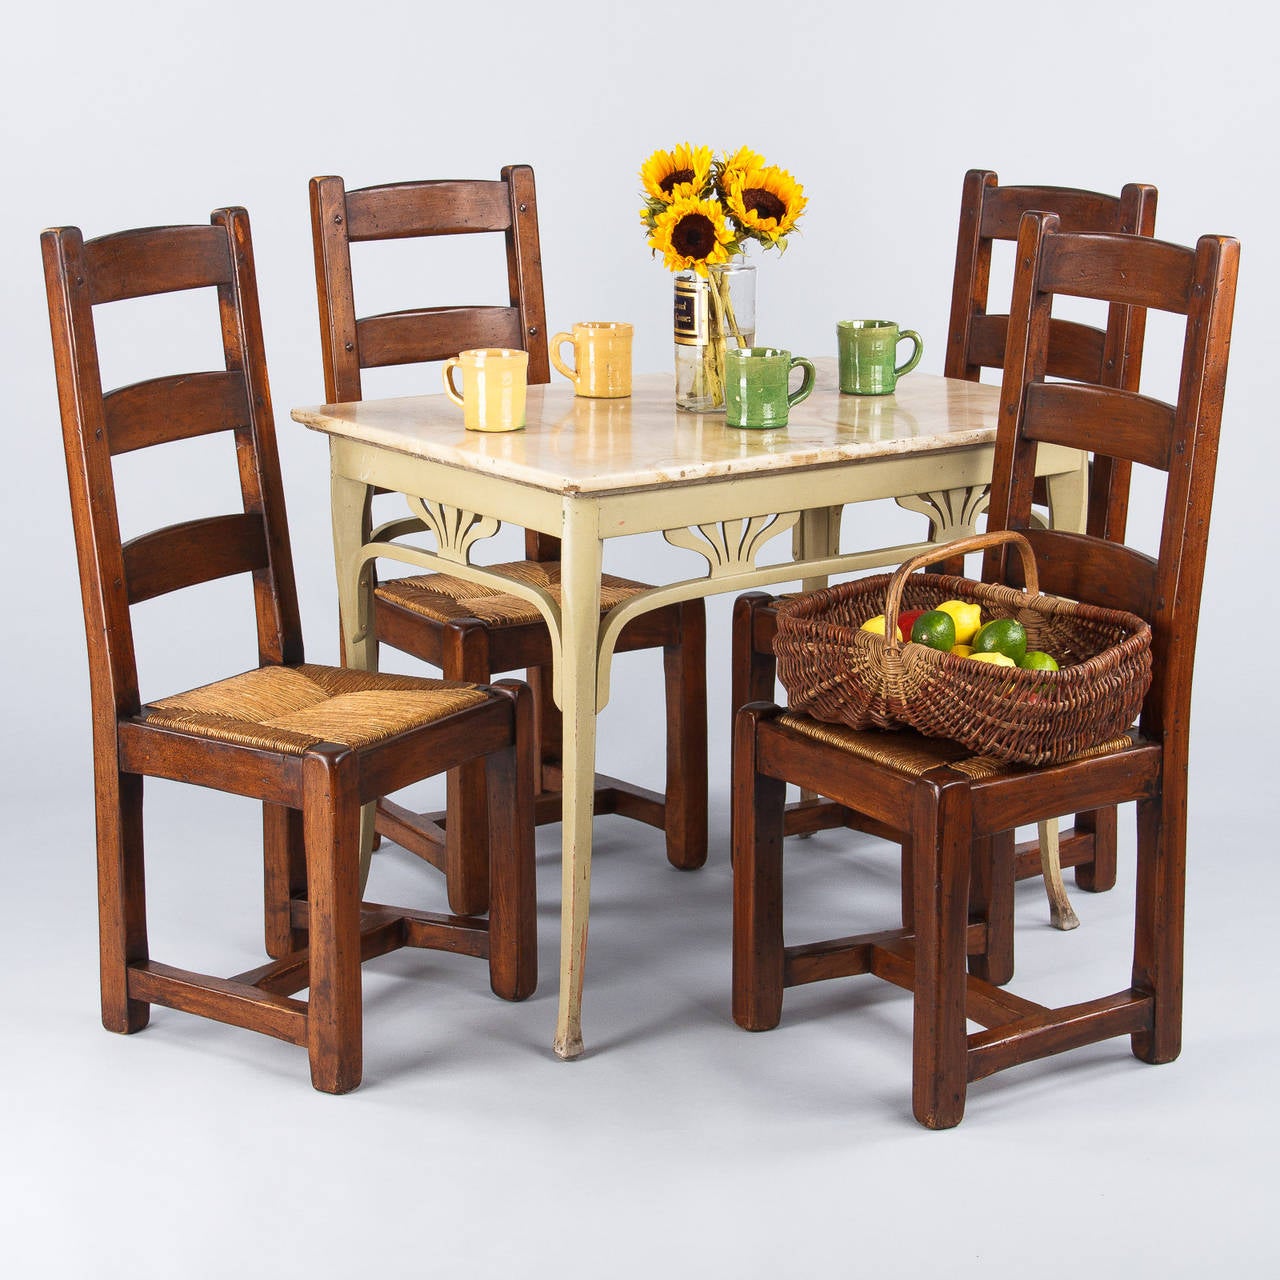 A set of four Country French Chairs from Provence made of oak and featuring removable rush seats. The Chairs have clean lines, high ladder backs and H-shaped stretchers.